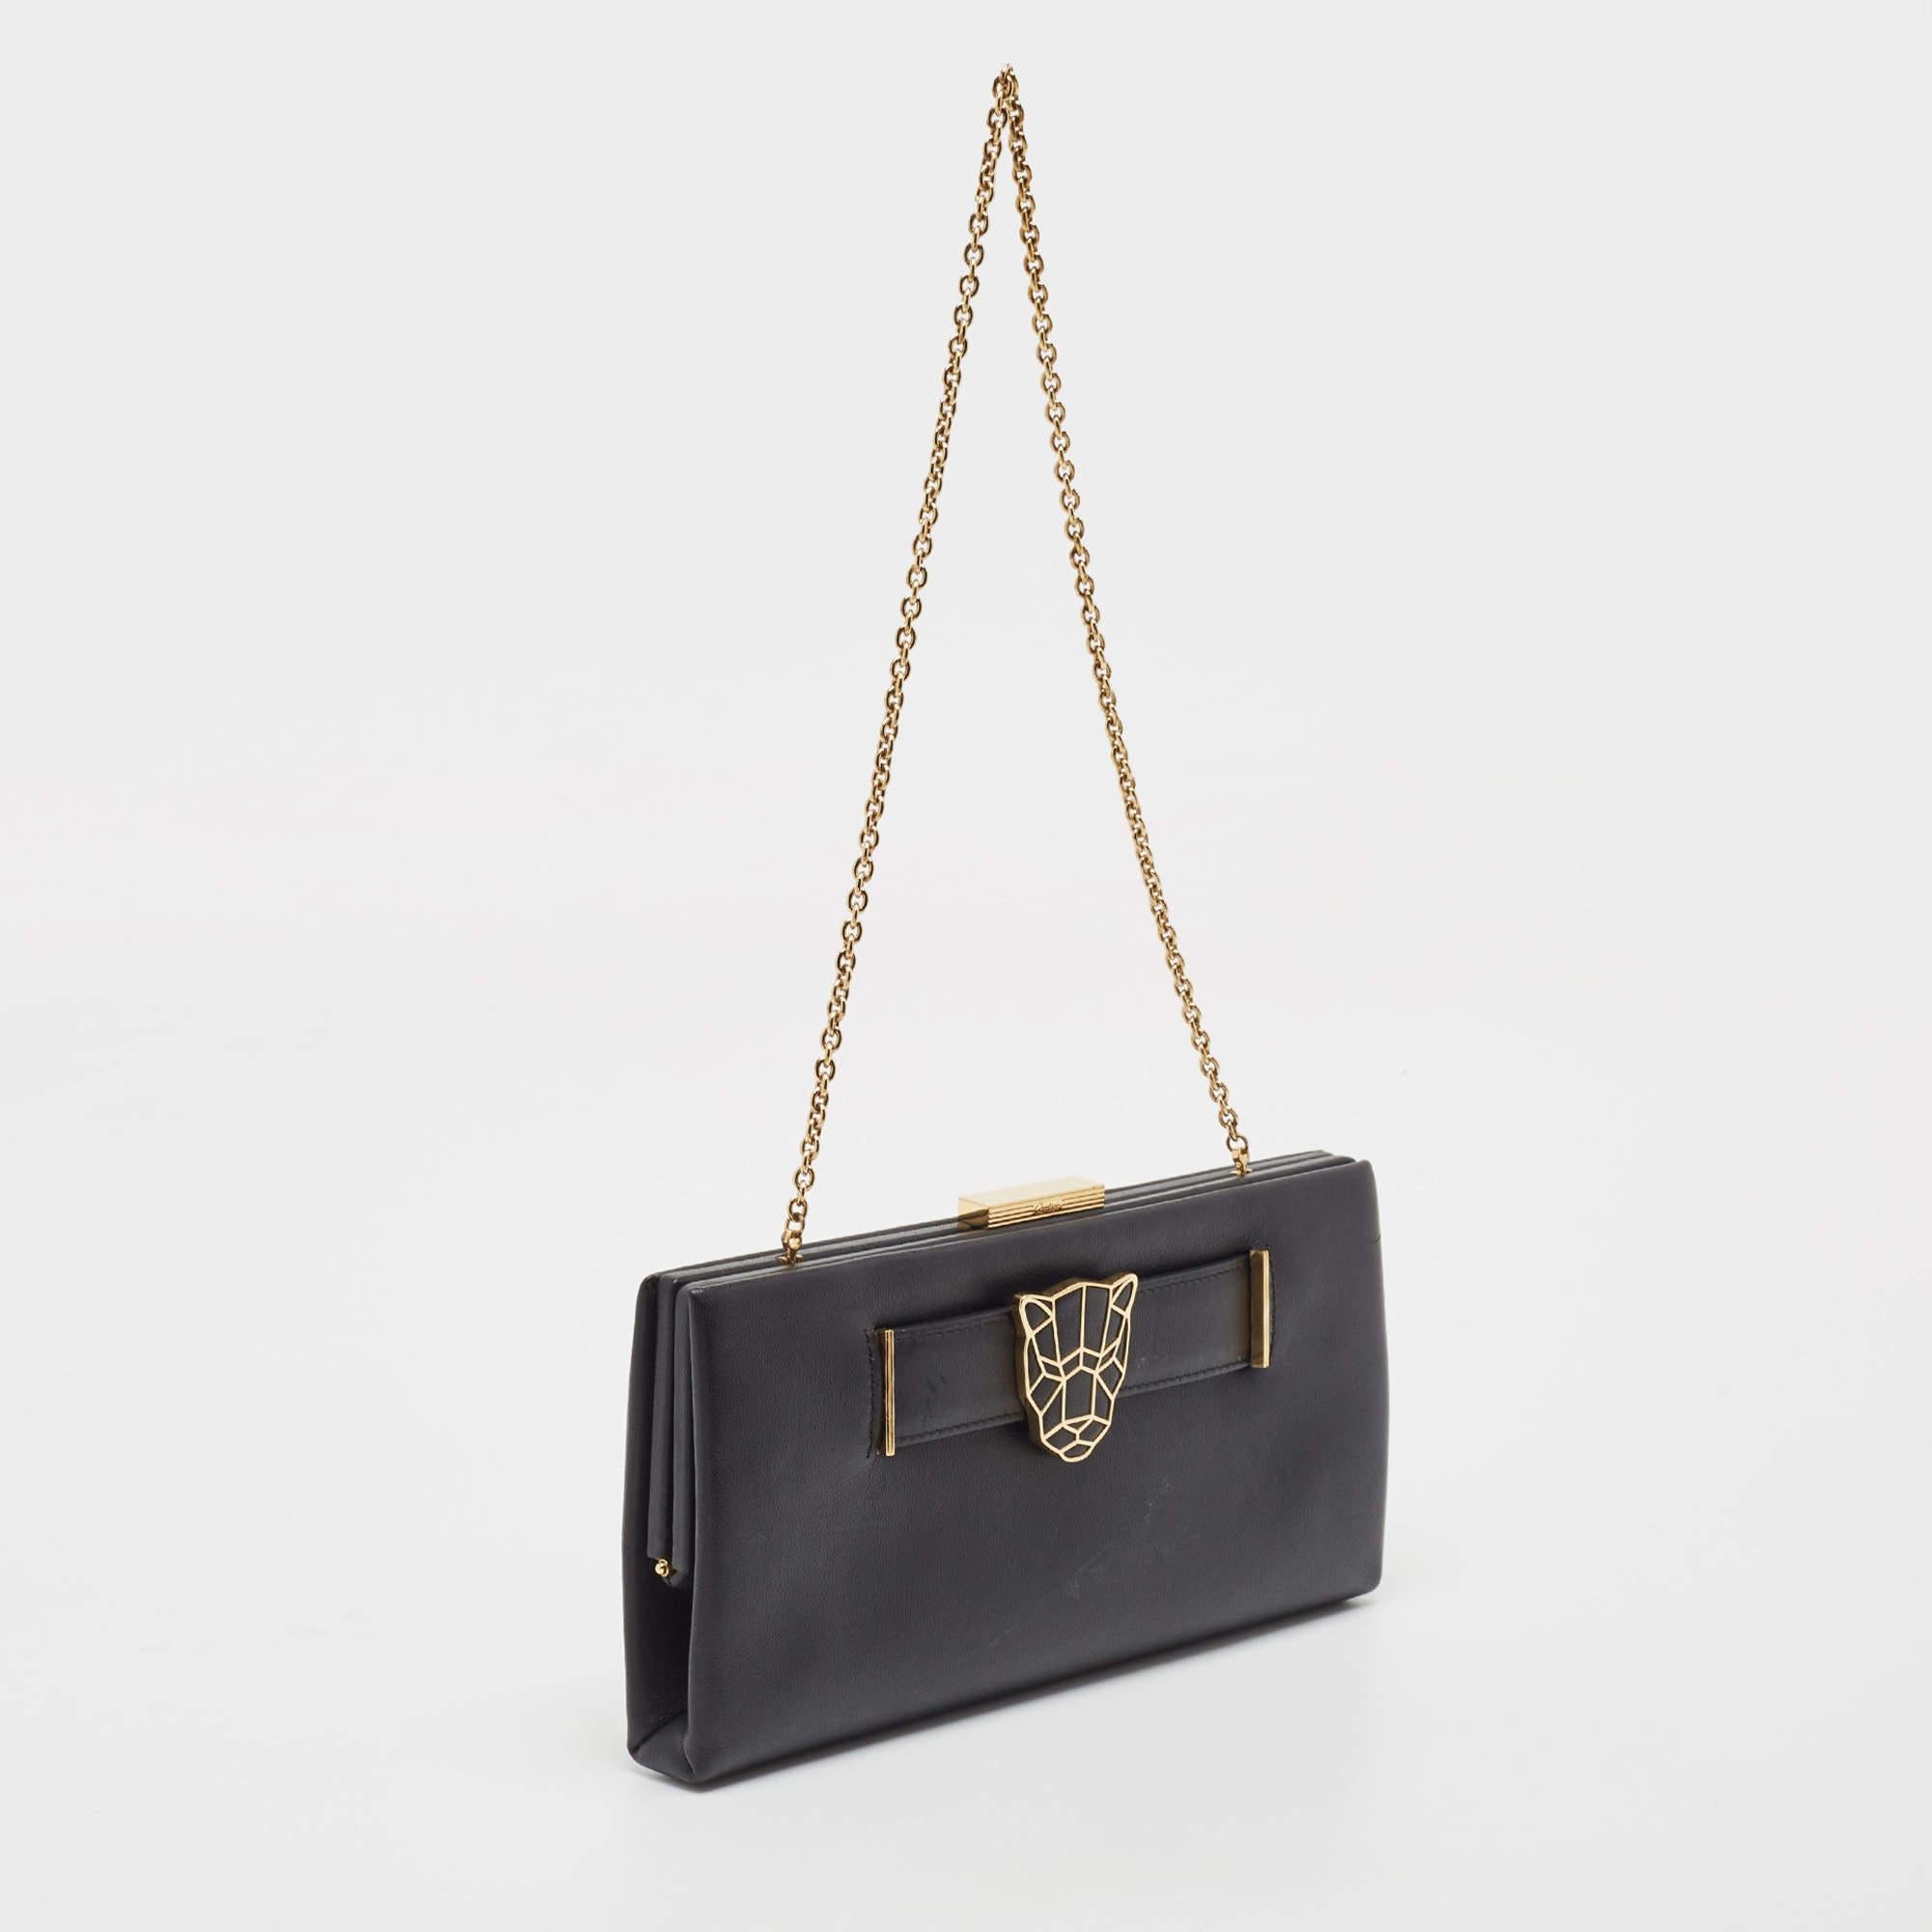 This Panthere de Cartier clutch is crafted from black leather and comes with a chain handle. The lined interior will hold your essentials and the panther detail on the front will deliver a look of luxury.

